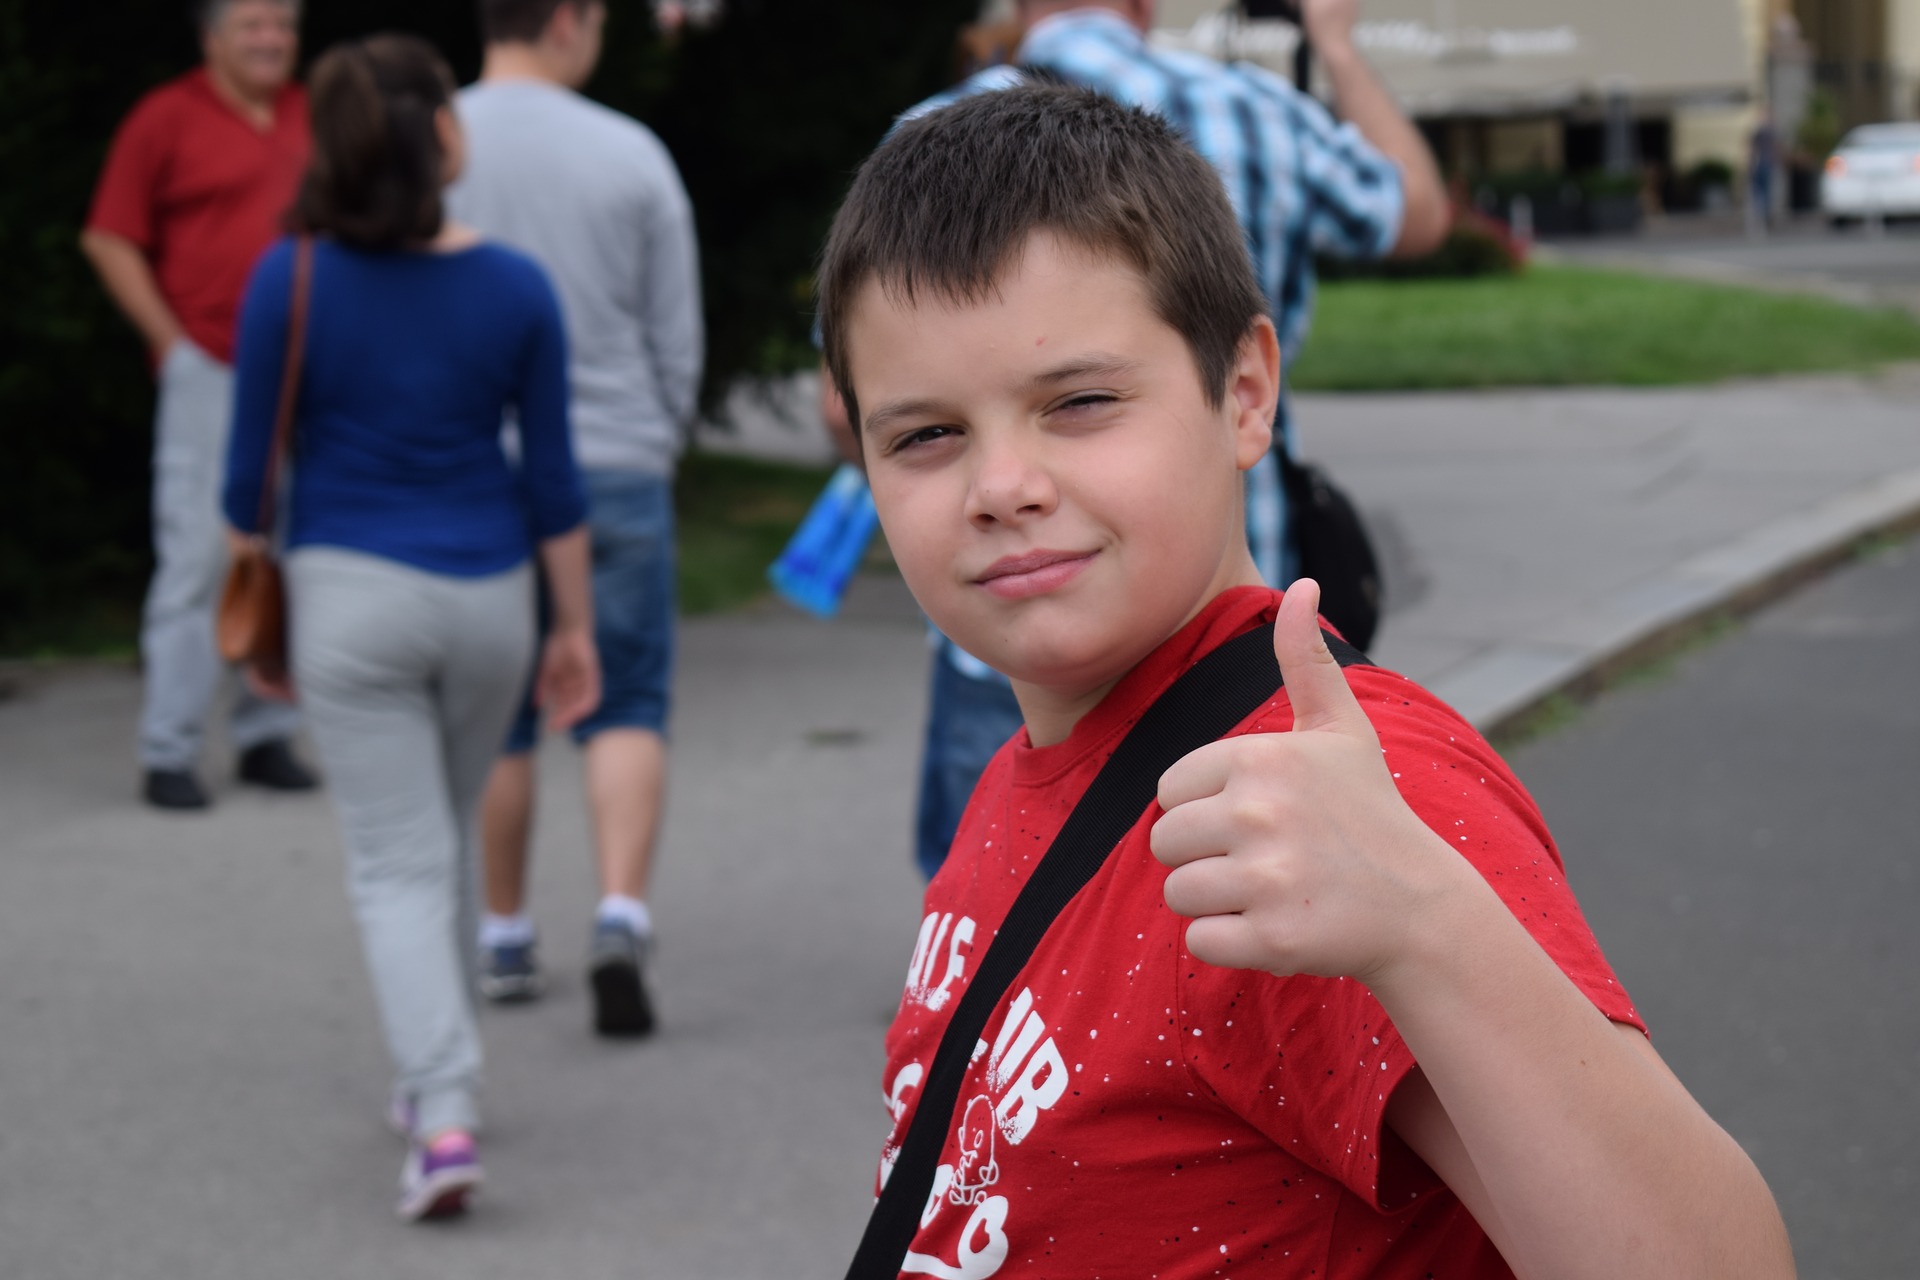 Child giving Thumbs up